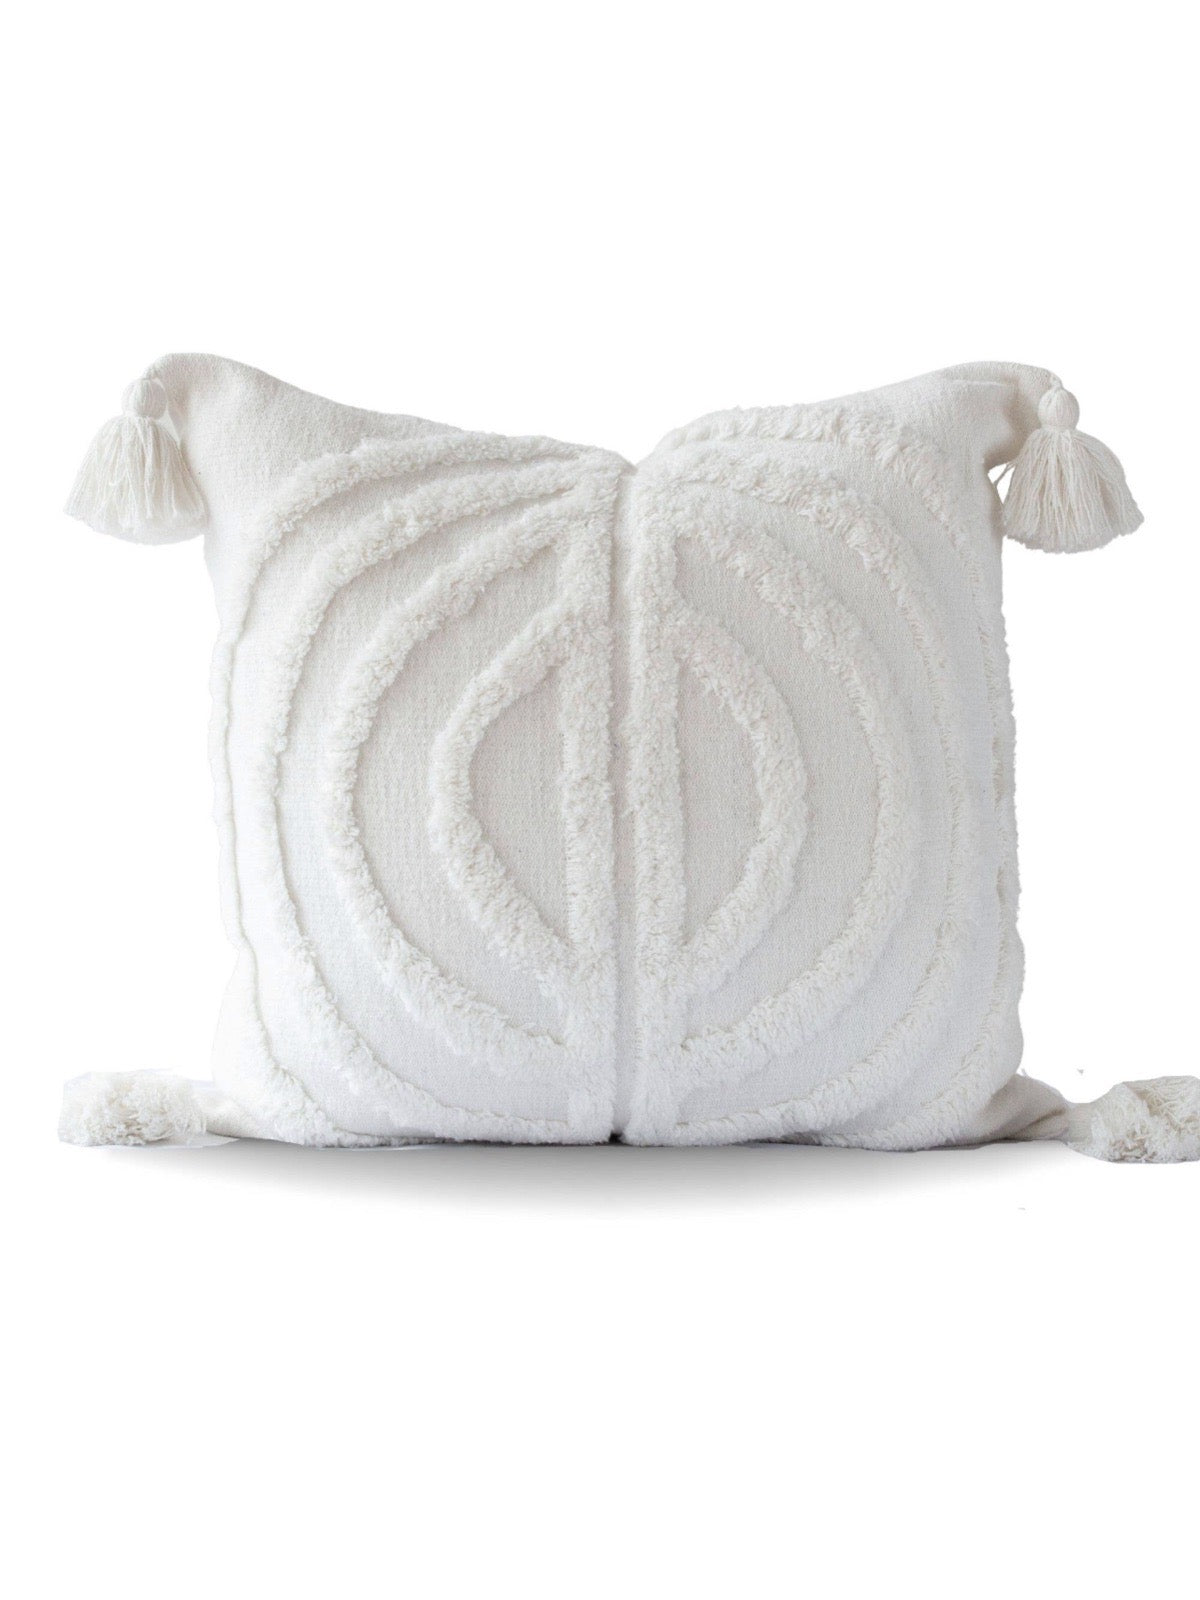 Add a classic yet playful touch to any room with our 22x22 Belle Concentric Circles Tufted Pillow Cover. Available in 2 colors. Sold by KYA Home Decor